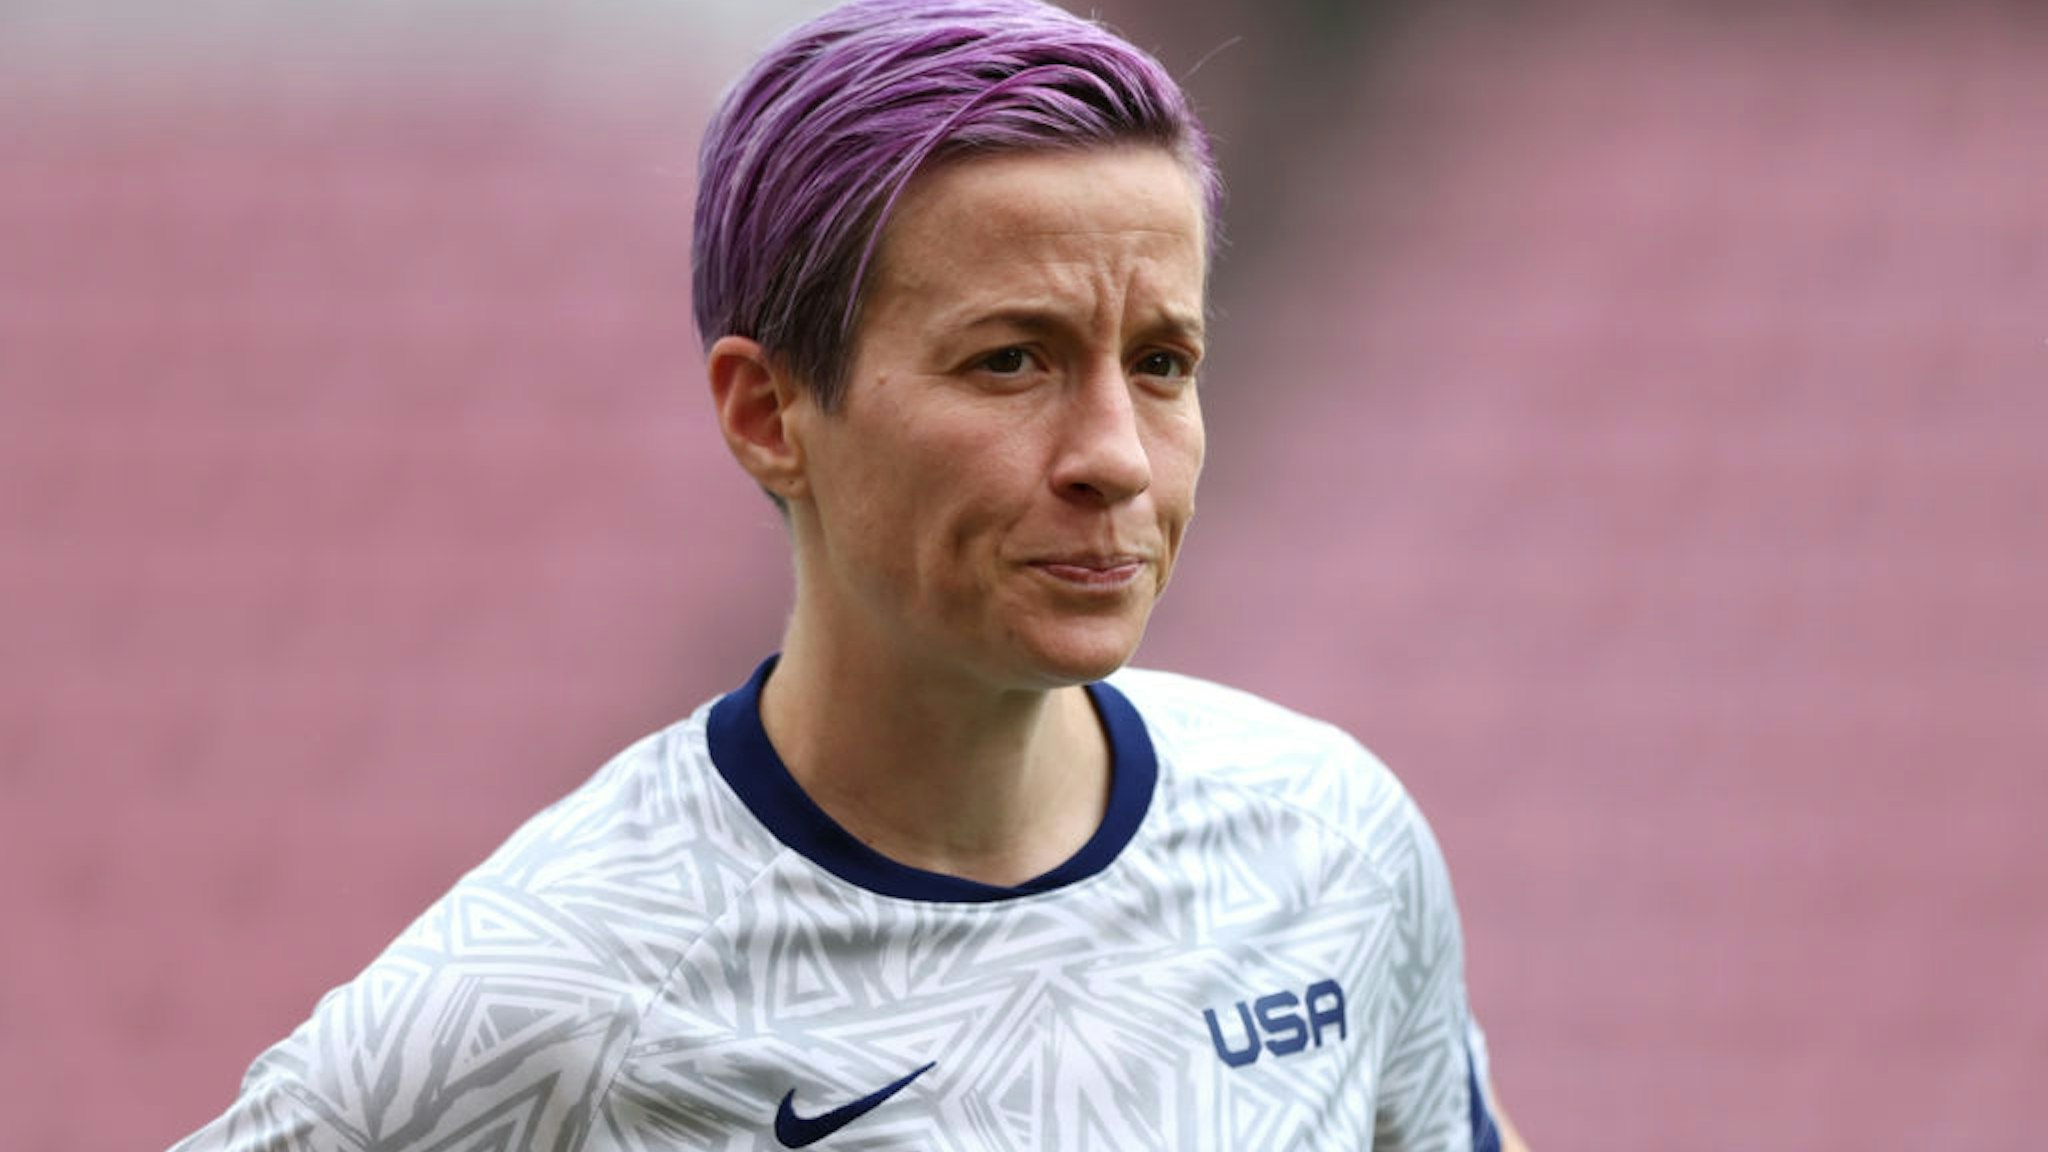 Megan Rapinoe #15 of Team United States looks on as she warms up prior to the Women's Semi-Final match between USA and Canada on day ten of the Tokyo Olympic Games at Kashima Stadium on August 02, 2021 in Kashima, Ibaraki, Japan.